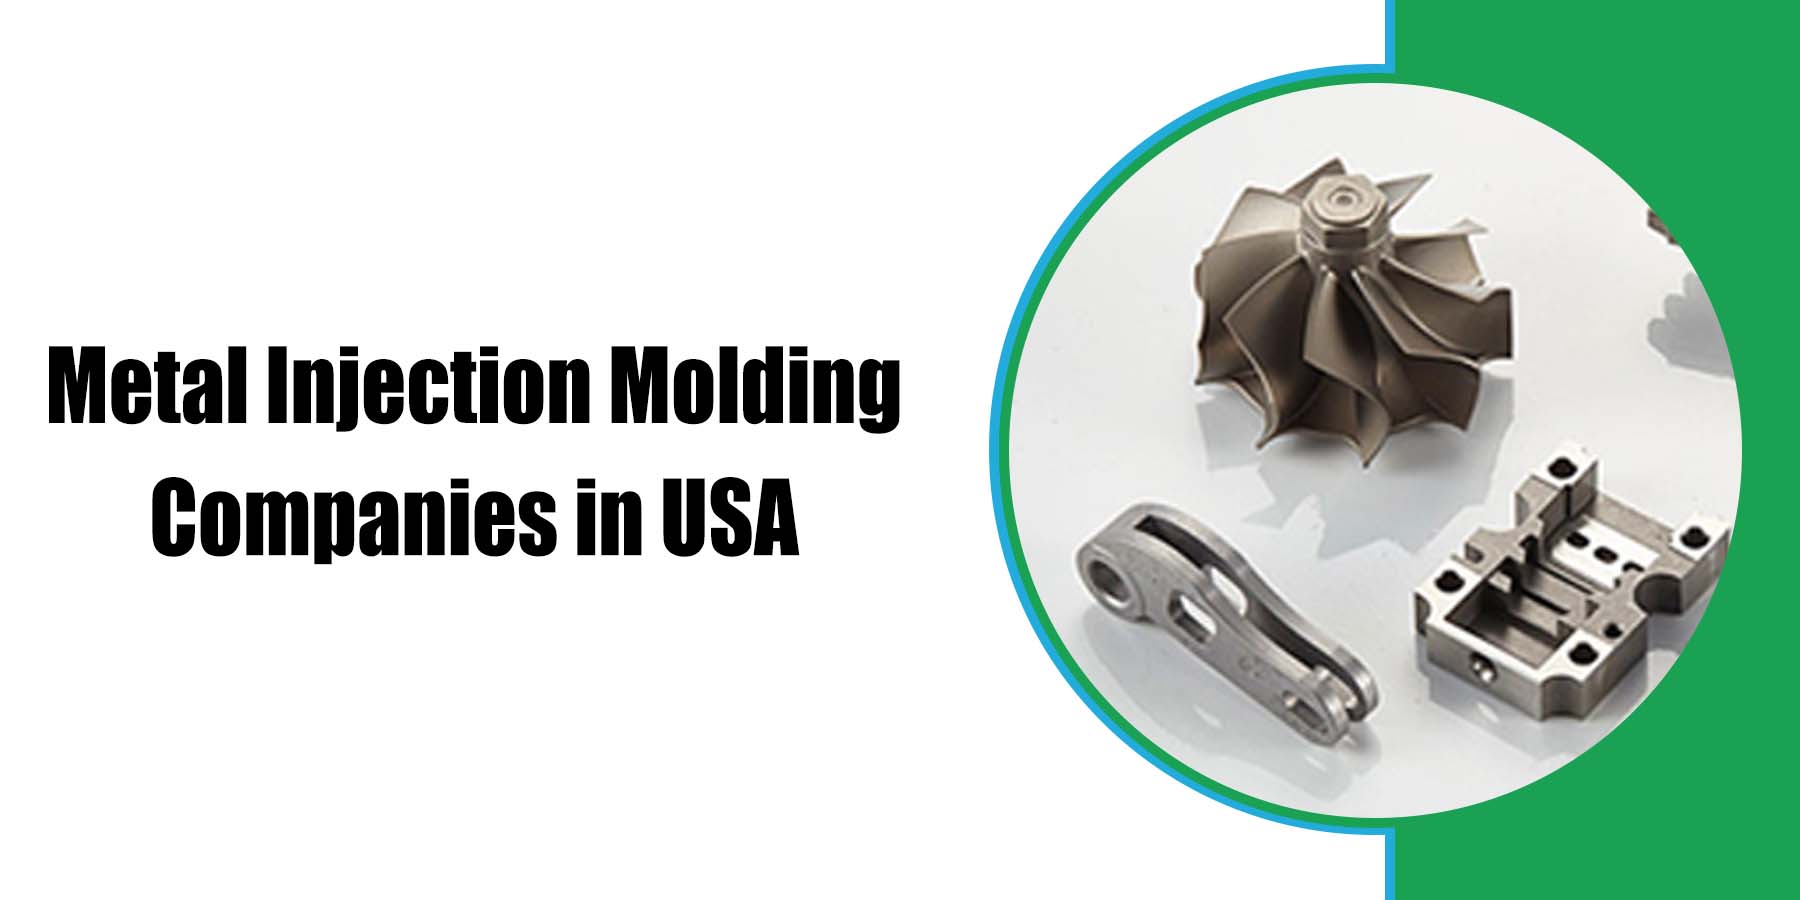 Metal Injection Molding Companies in USA